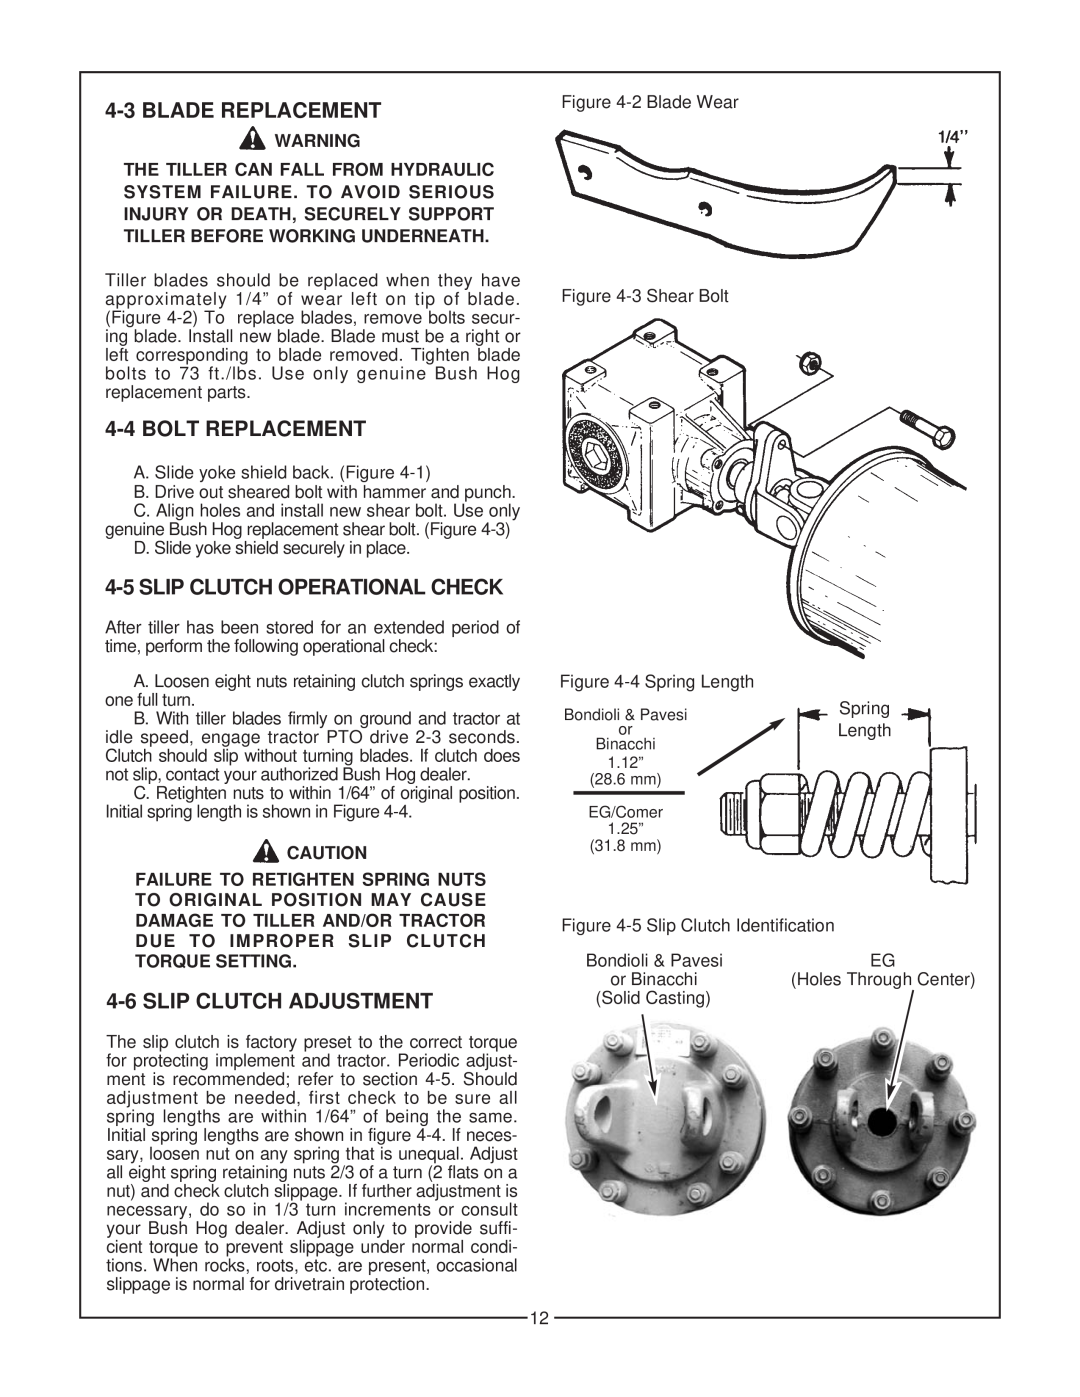 Bush Hog RTS manual 4-3BLADE REPLACEMENT, 4-4BOLT REPLACEMENT, 4-5SLIP CLUTCH OPERATIONAL CHECK, 4-6SLIP CLUTCH ADJUSTMENT 